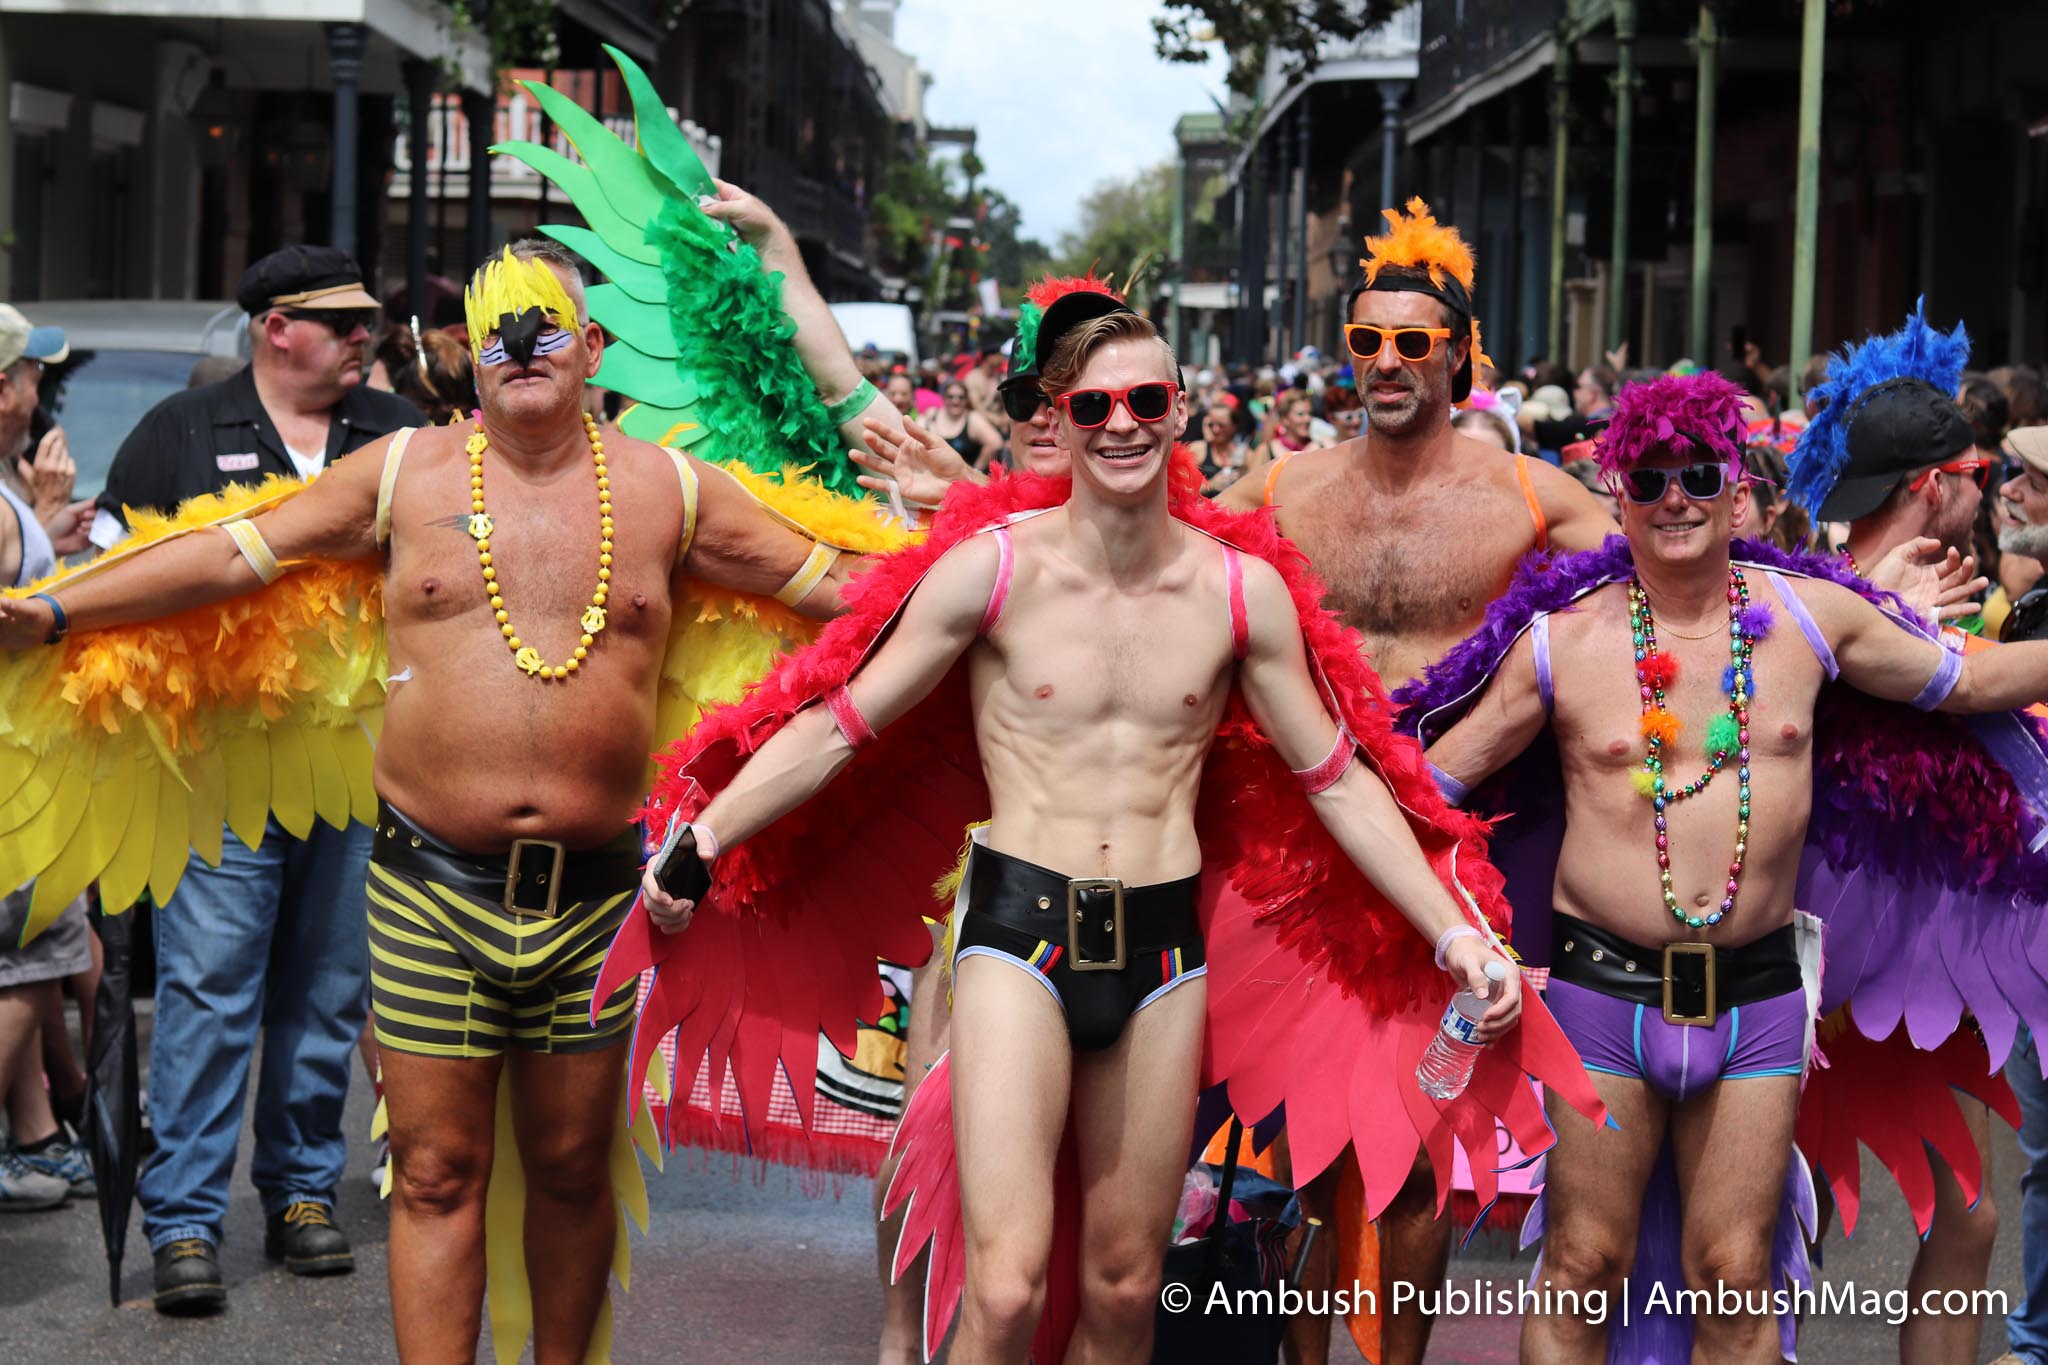 Scott Braud and Friends in 2018 Southern Decadence Parade